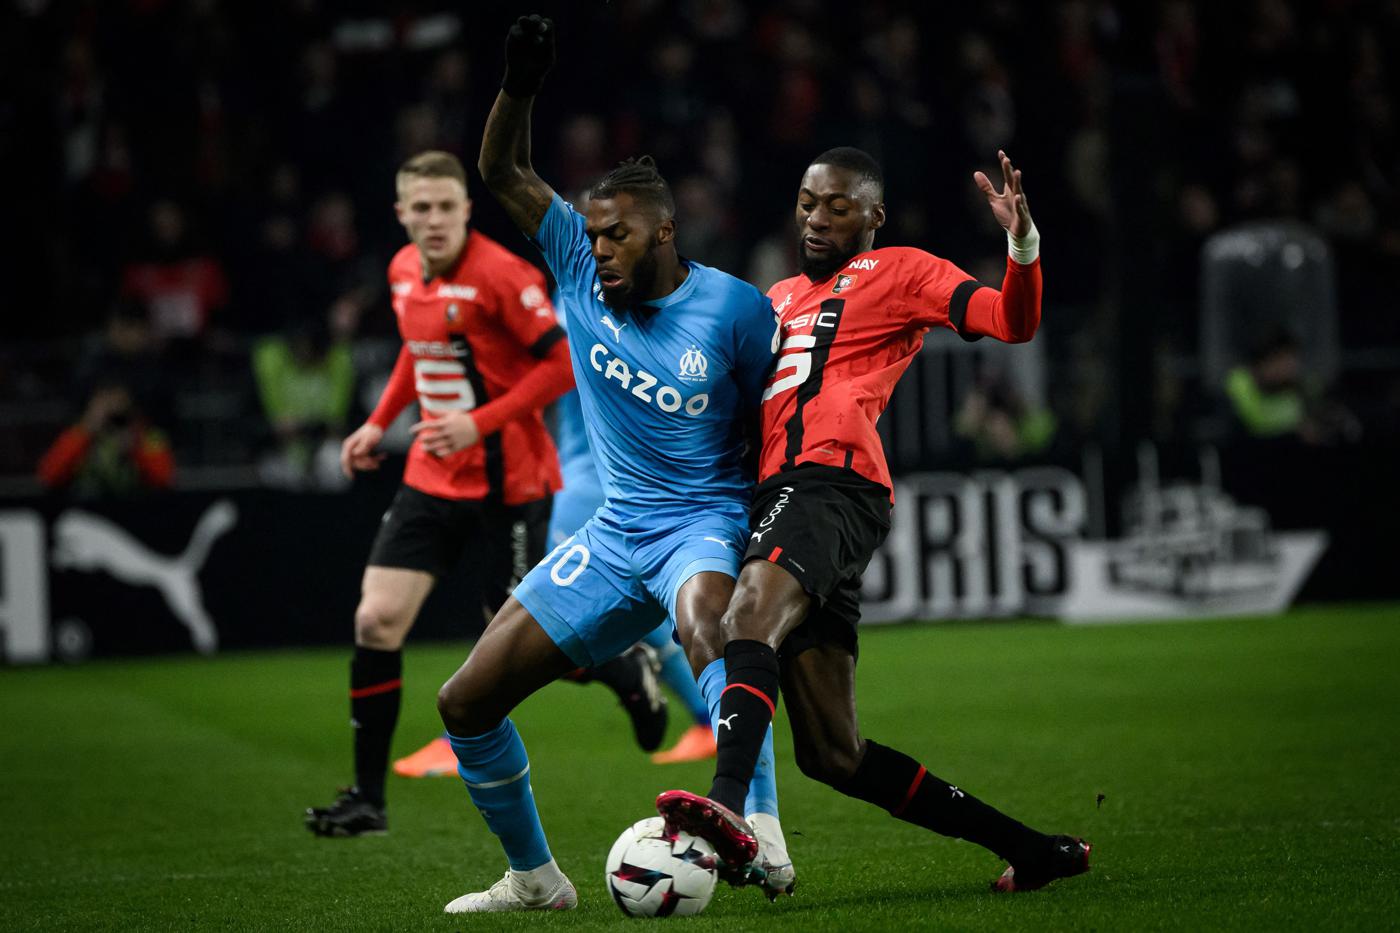 Rennes - Marseille - 0:1. French Championship, 26th round. Match review, statistics.